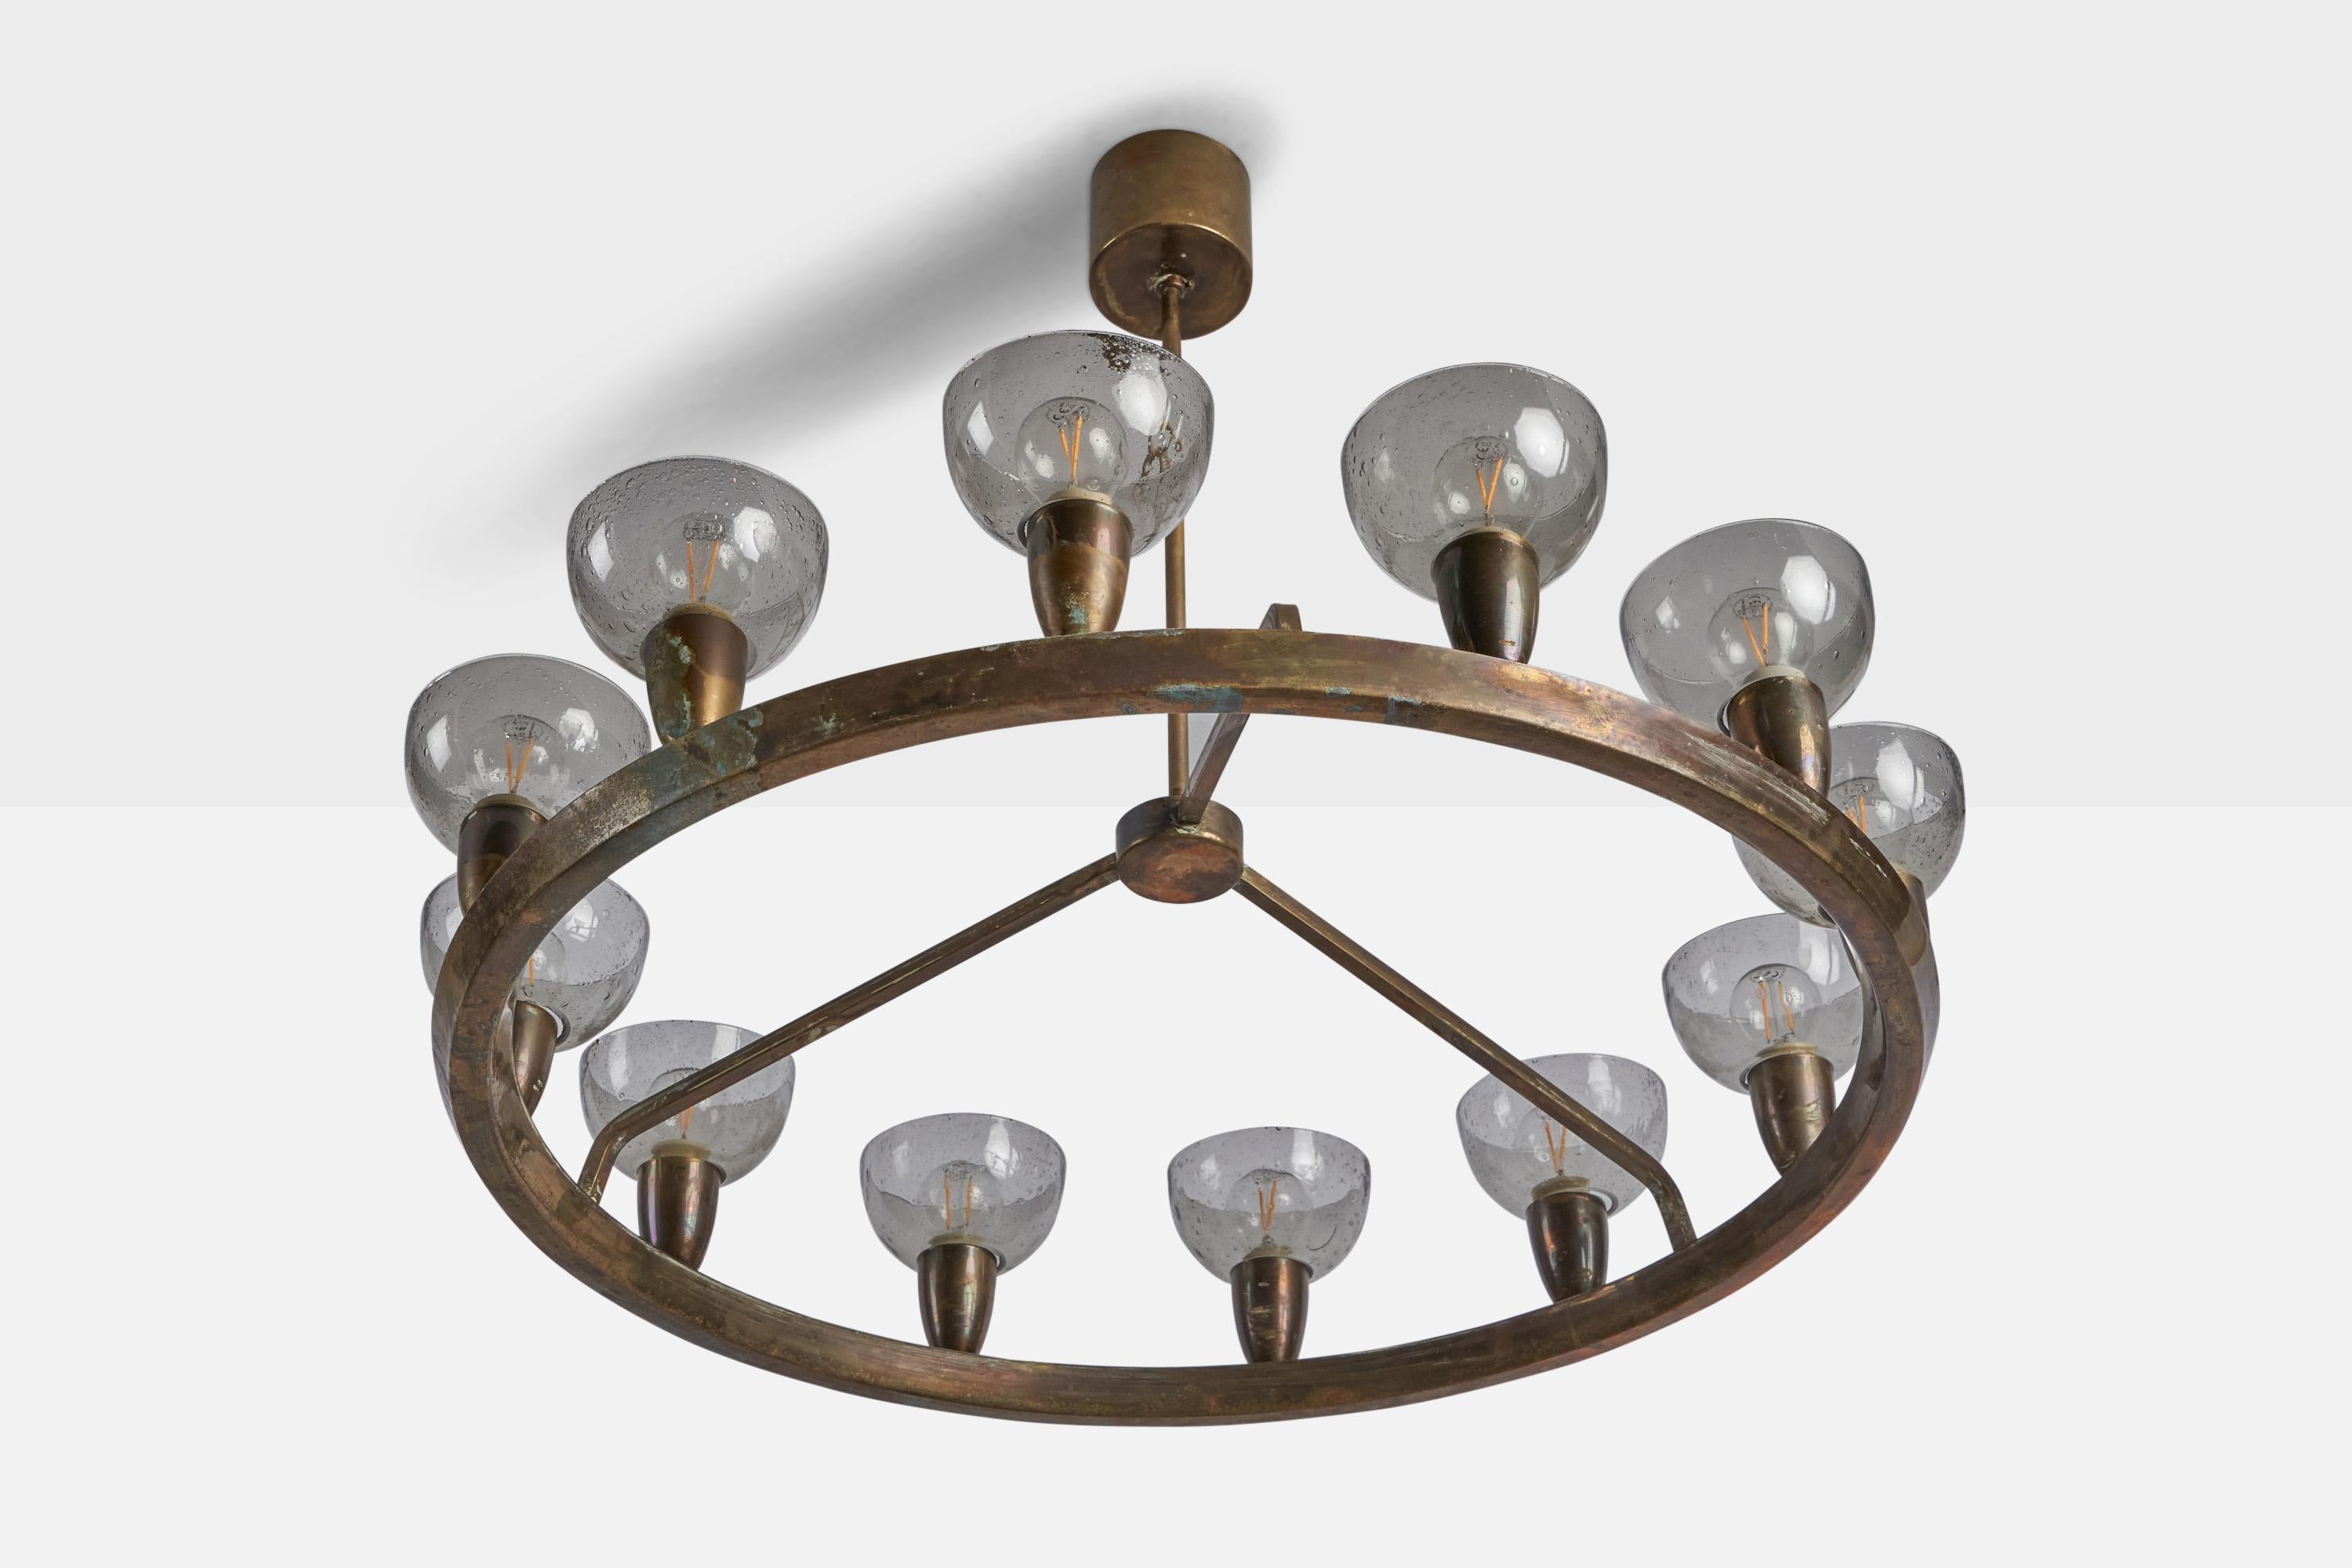 A blown glass and brass chandelier designed and produced in Italy, c. 1940s.

Overall Dimensions (inches): 21.5” H x 28.5” Diameter
Bulb Specifications: E-14 Bulb
Number of Sockets: 12